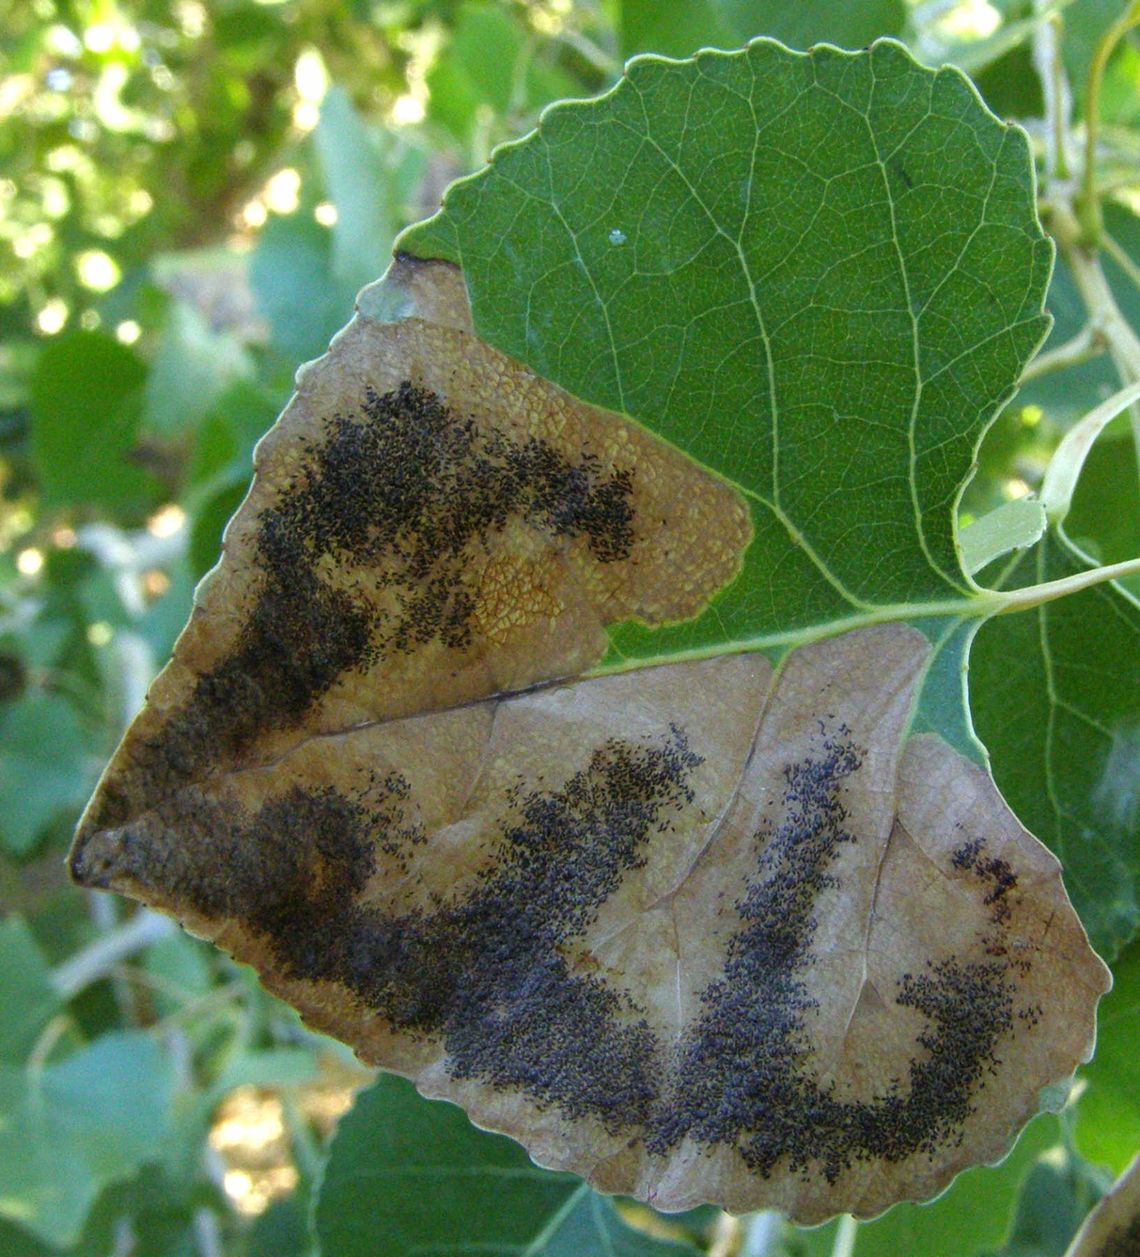 Edith -- Leaf Miners Attacking Cottonwoods